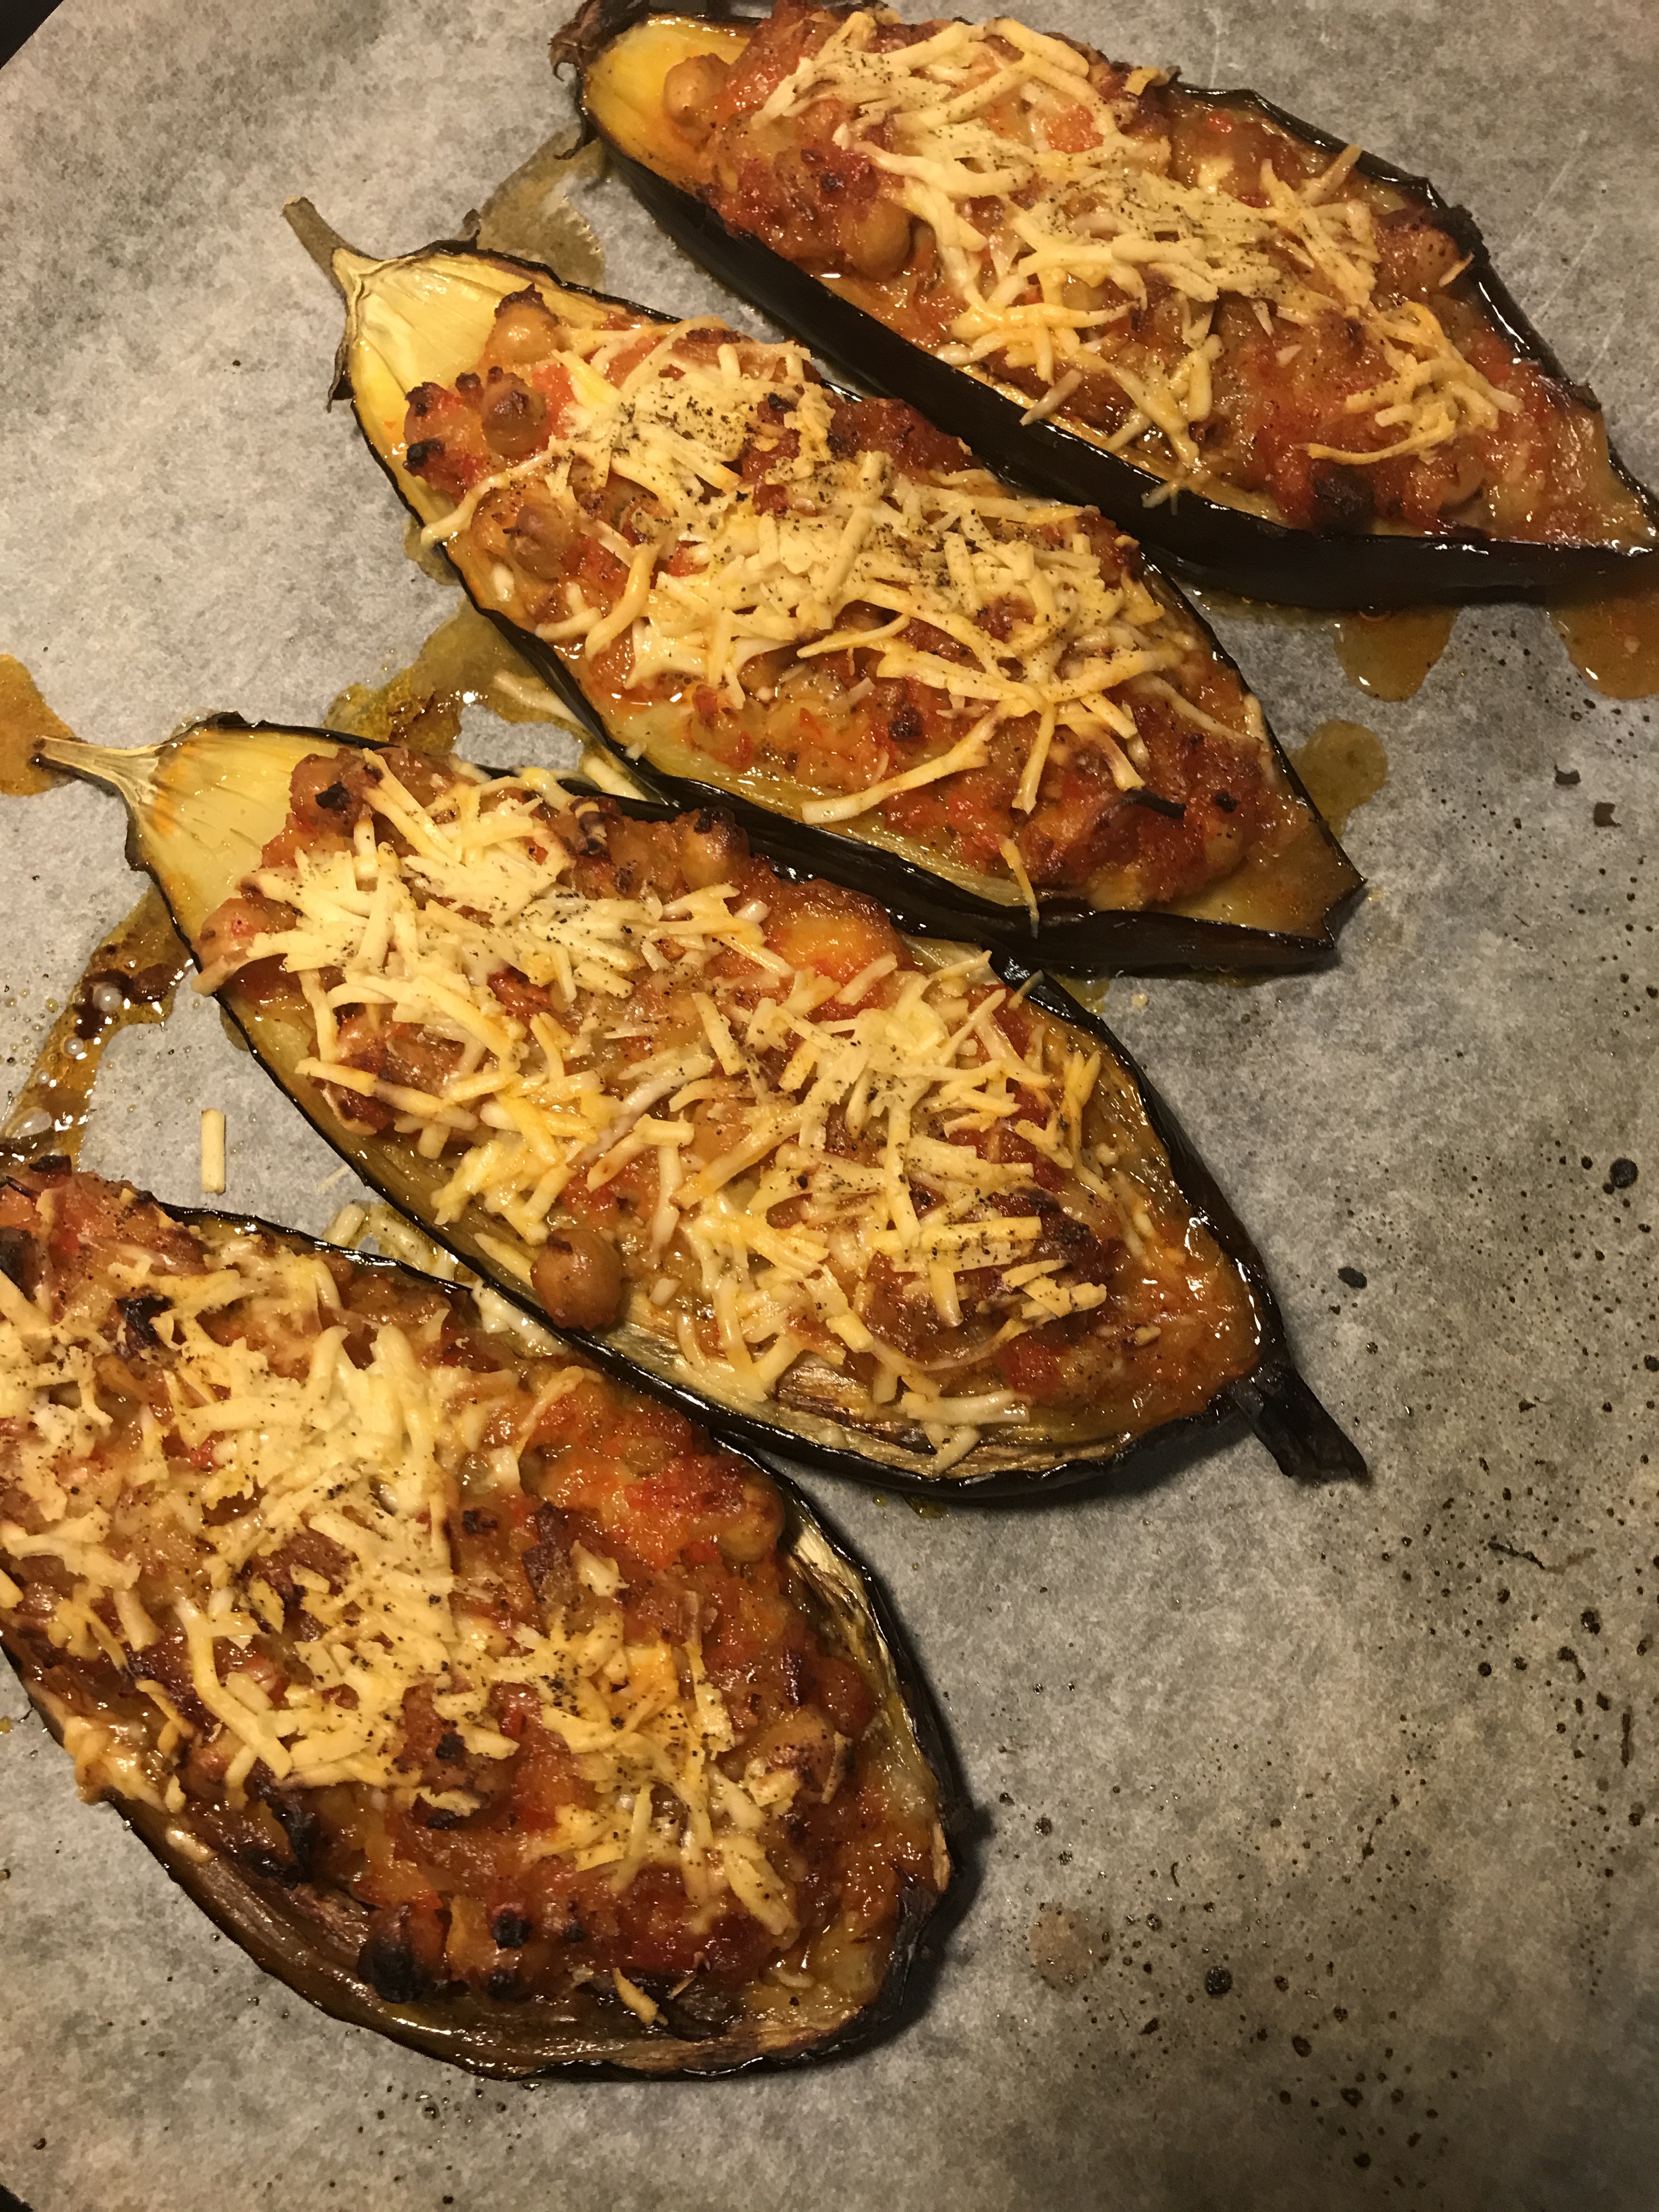 Twice roasted eggplant with chickpeas & red peppers